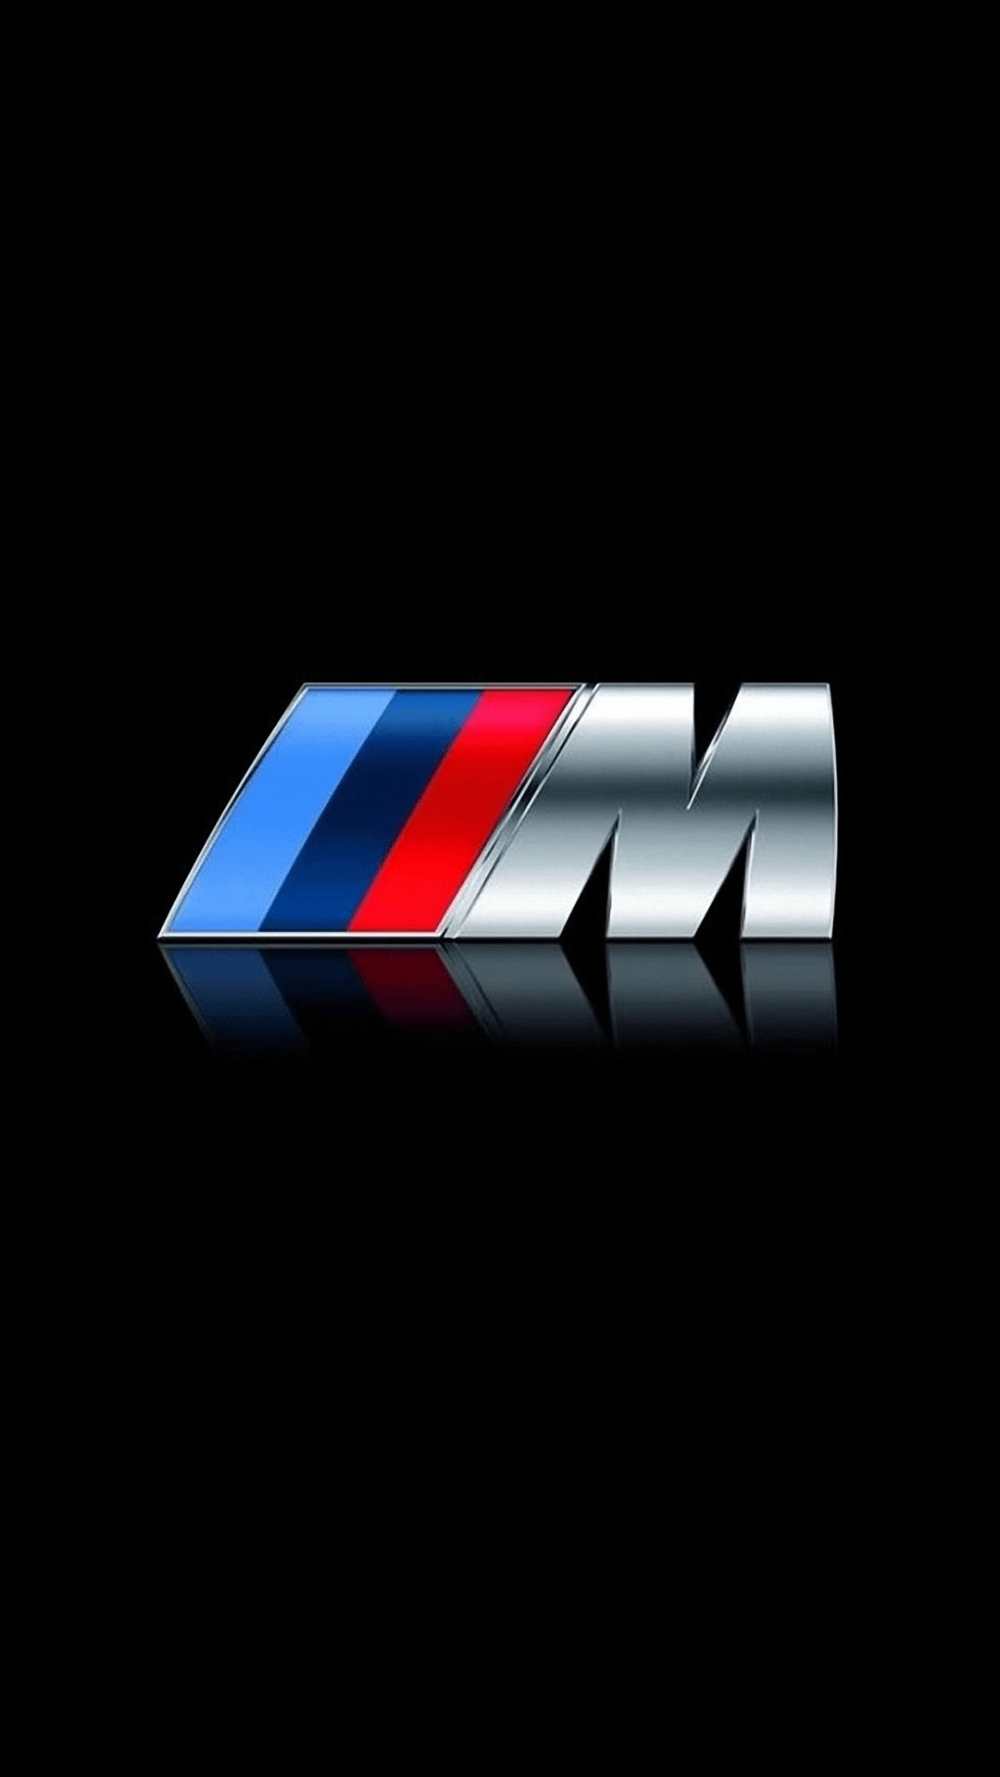 Bmw Logo Iphone Wallpapers Top Free Bmw Logo Iphone Backgrounds Wallpaperaccess